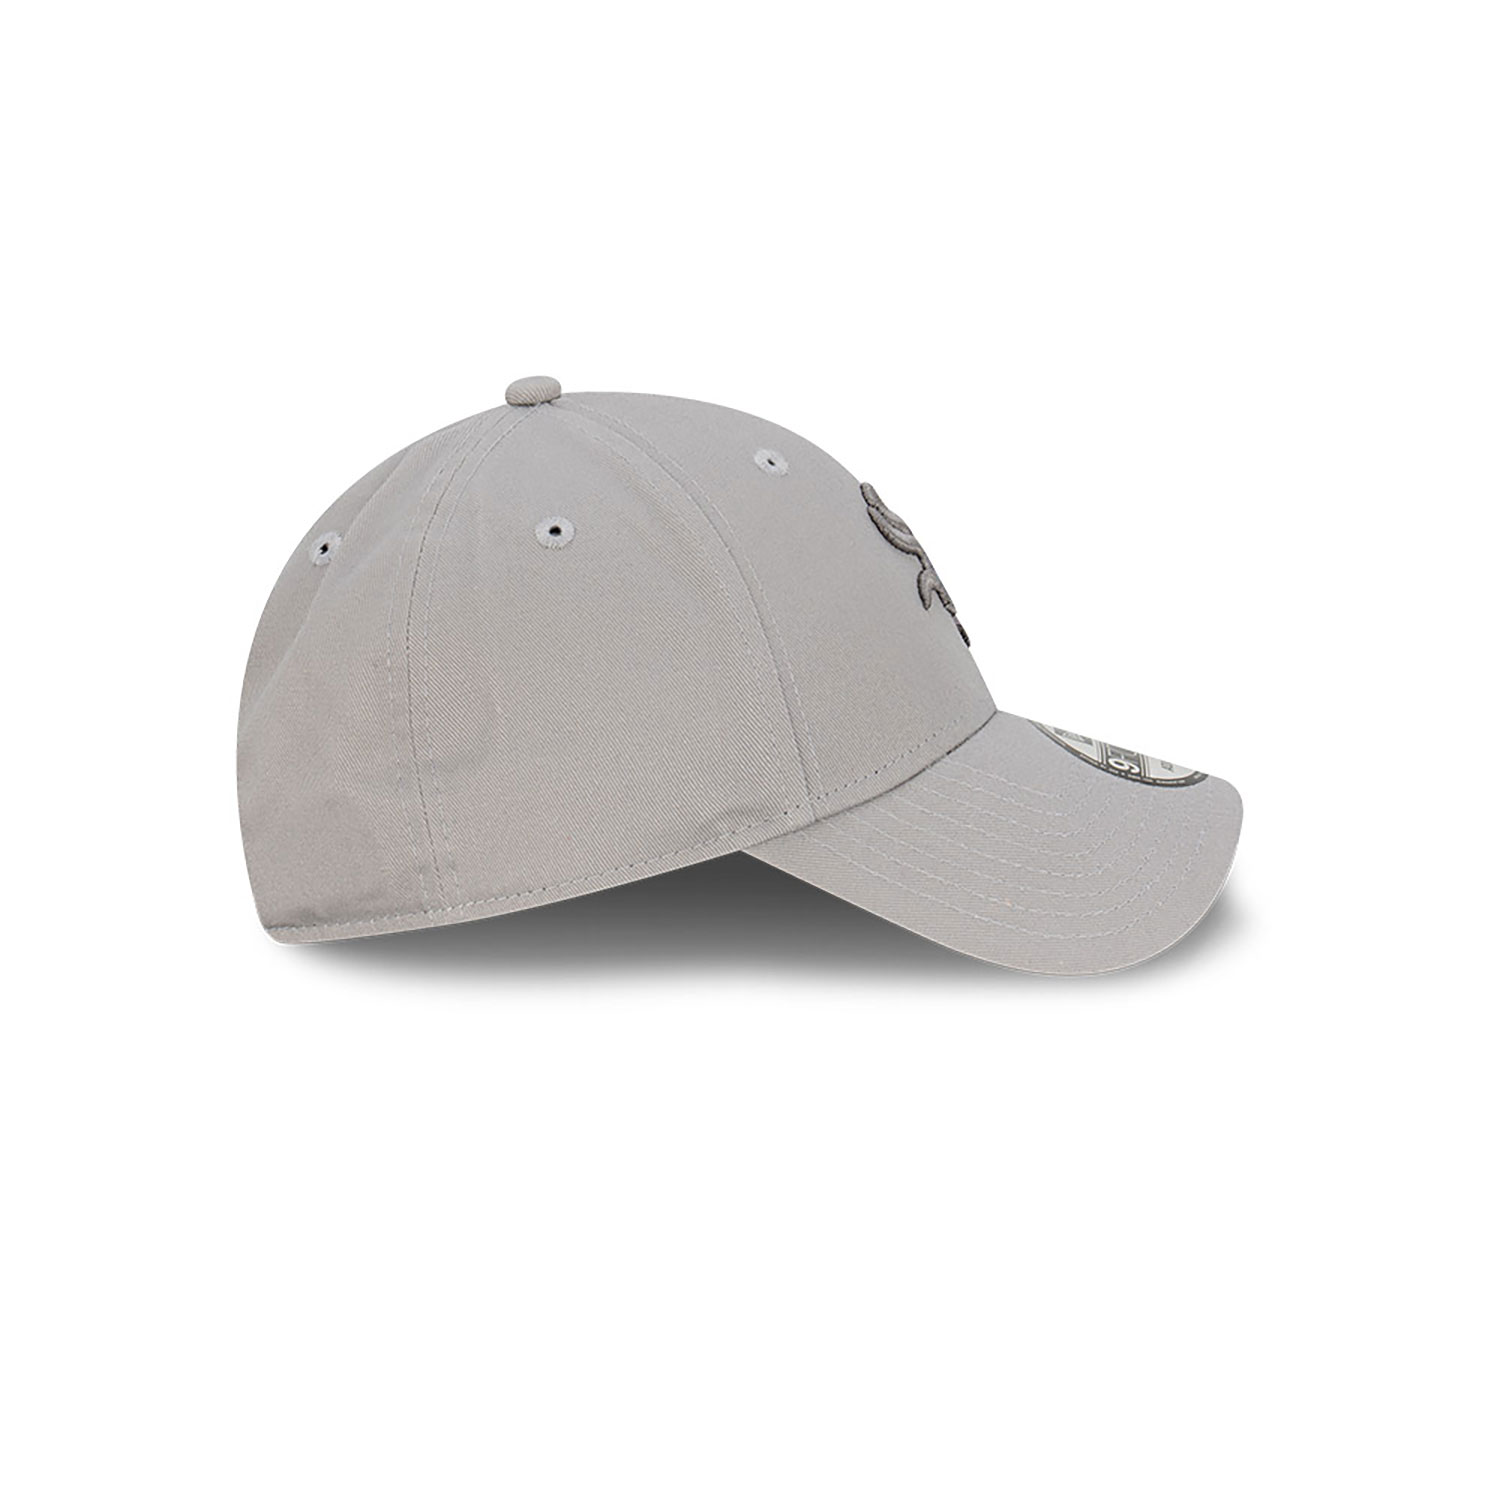 Chicago White Sox Moon Dust Grey 9FORTY Adjustable Cap